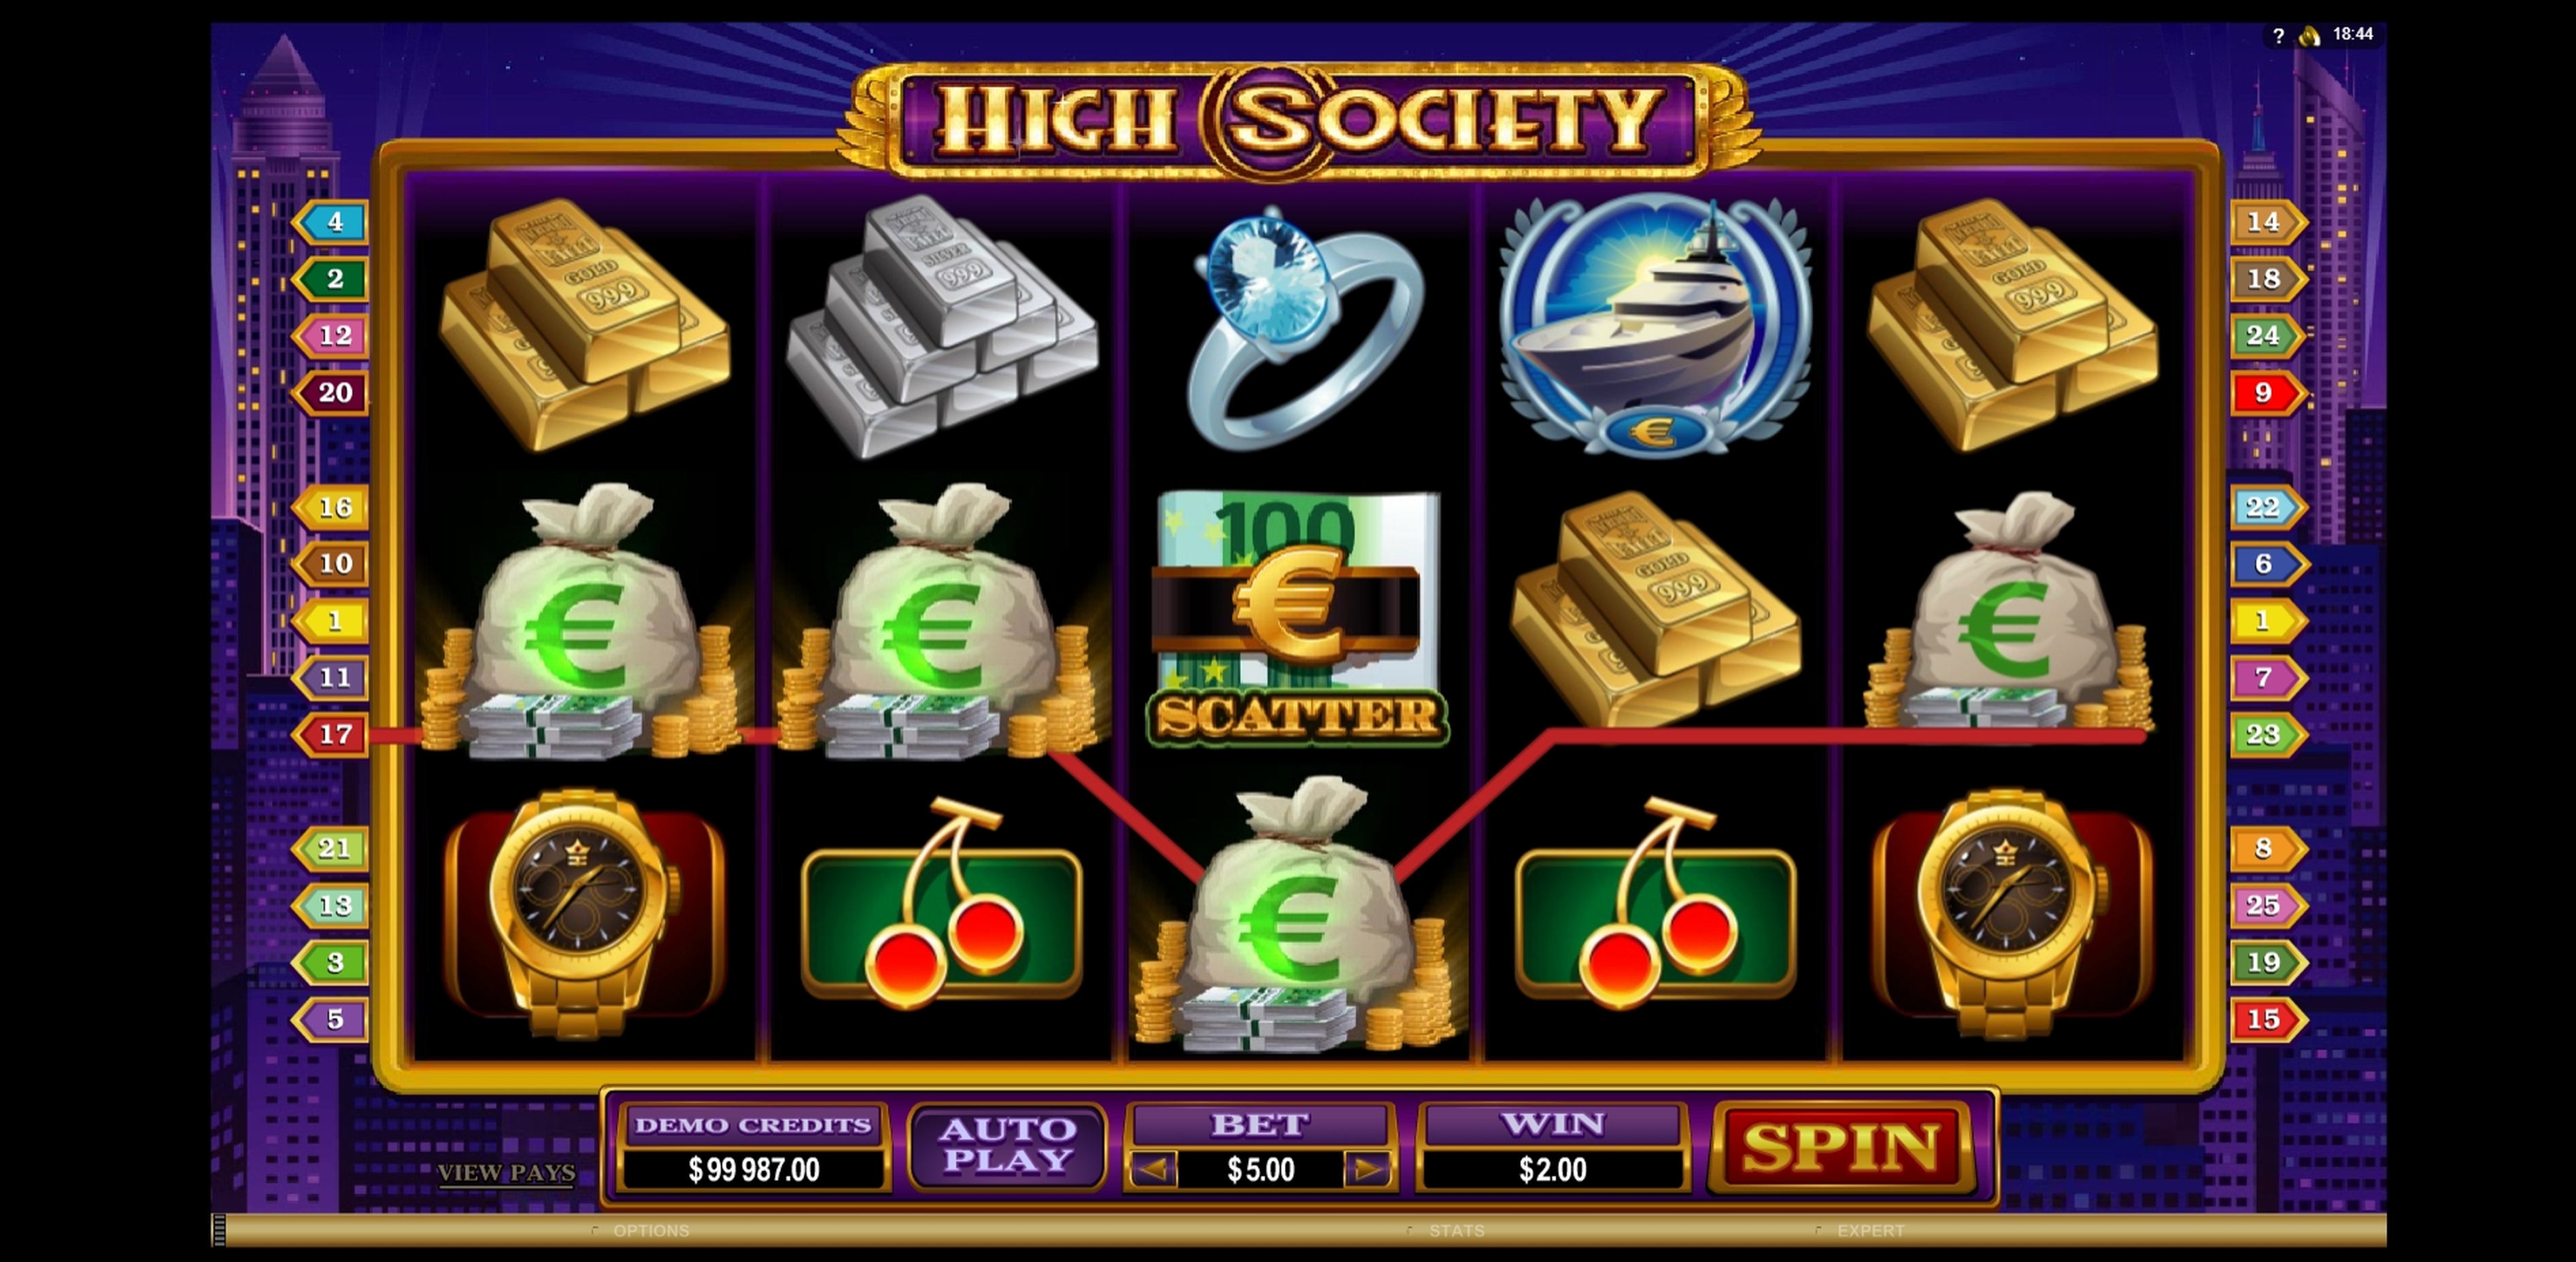 Win Money in High Society Free Slot Game by Microgaming